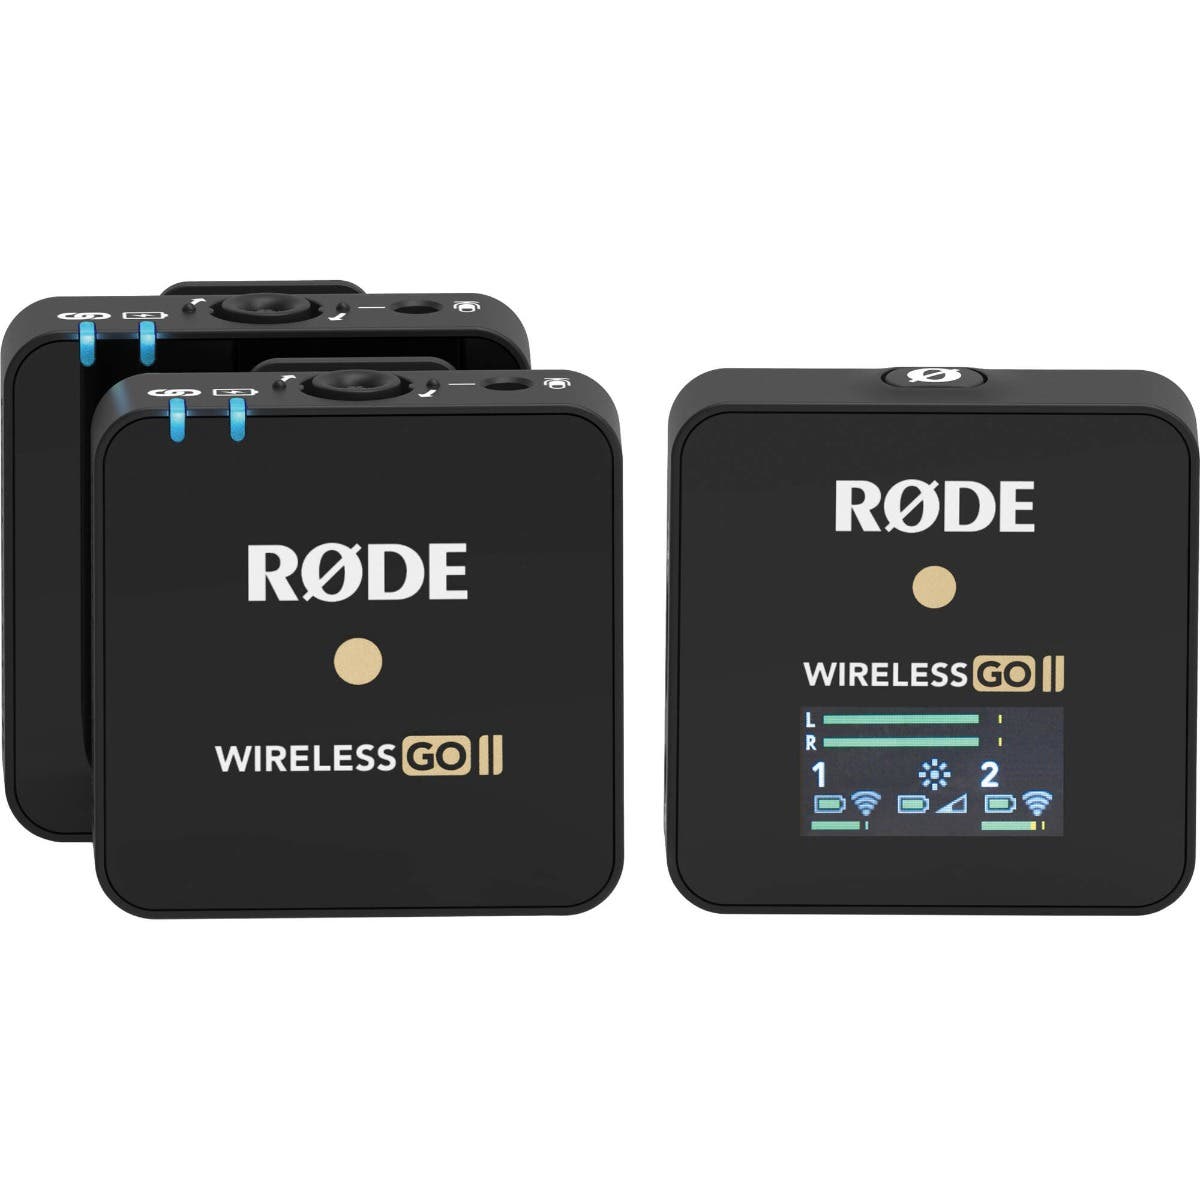 RODE Wireless GO II Dual Channel Compact Wireless Mic with 2x Lavalier GO Mics